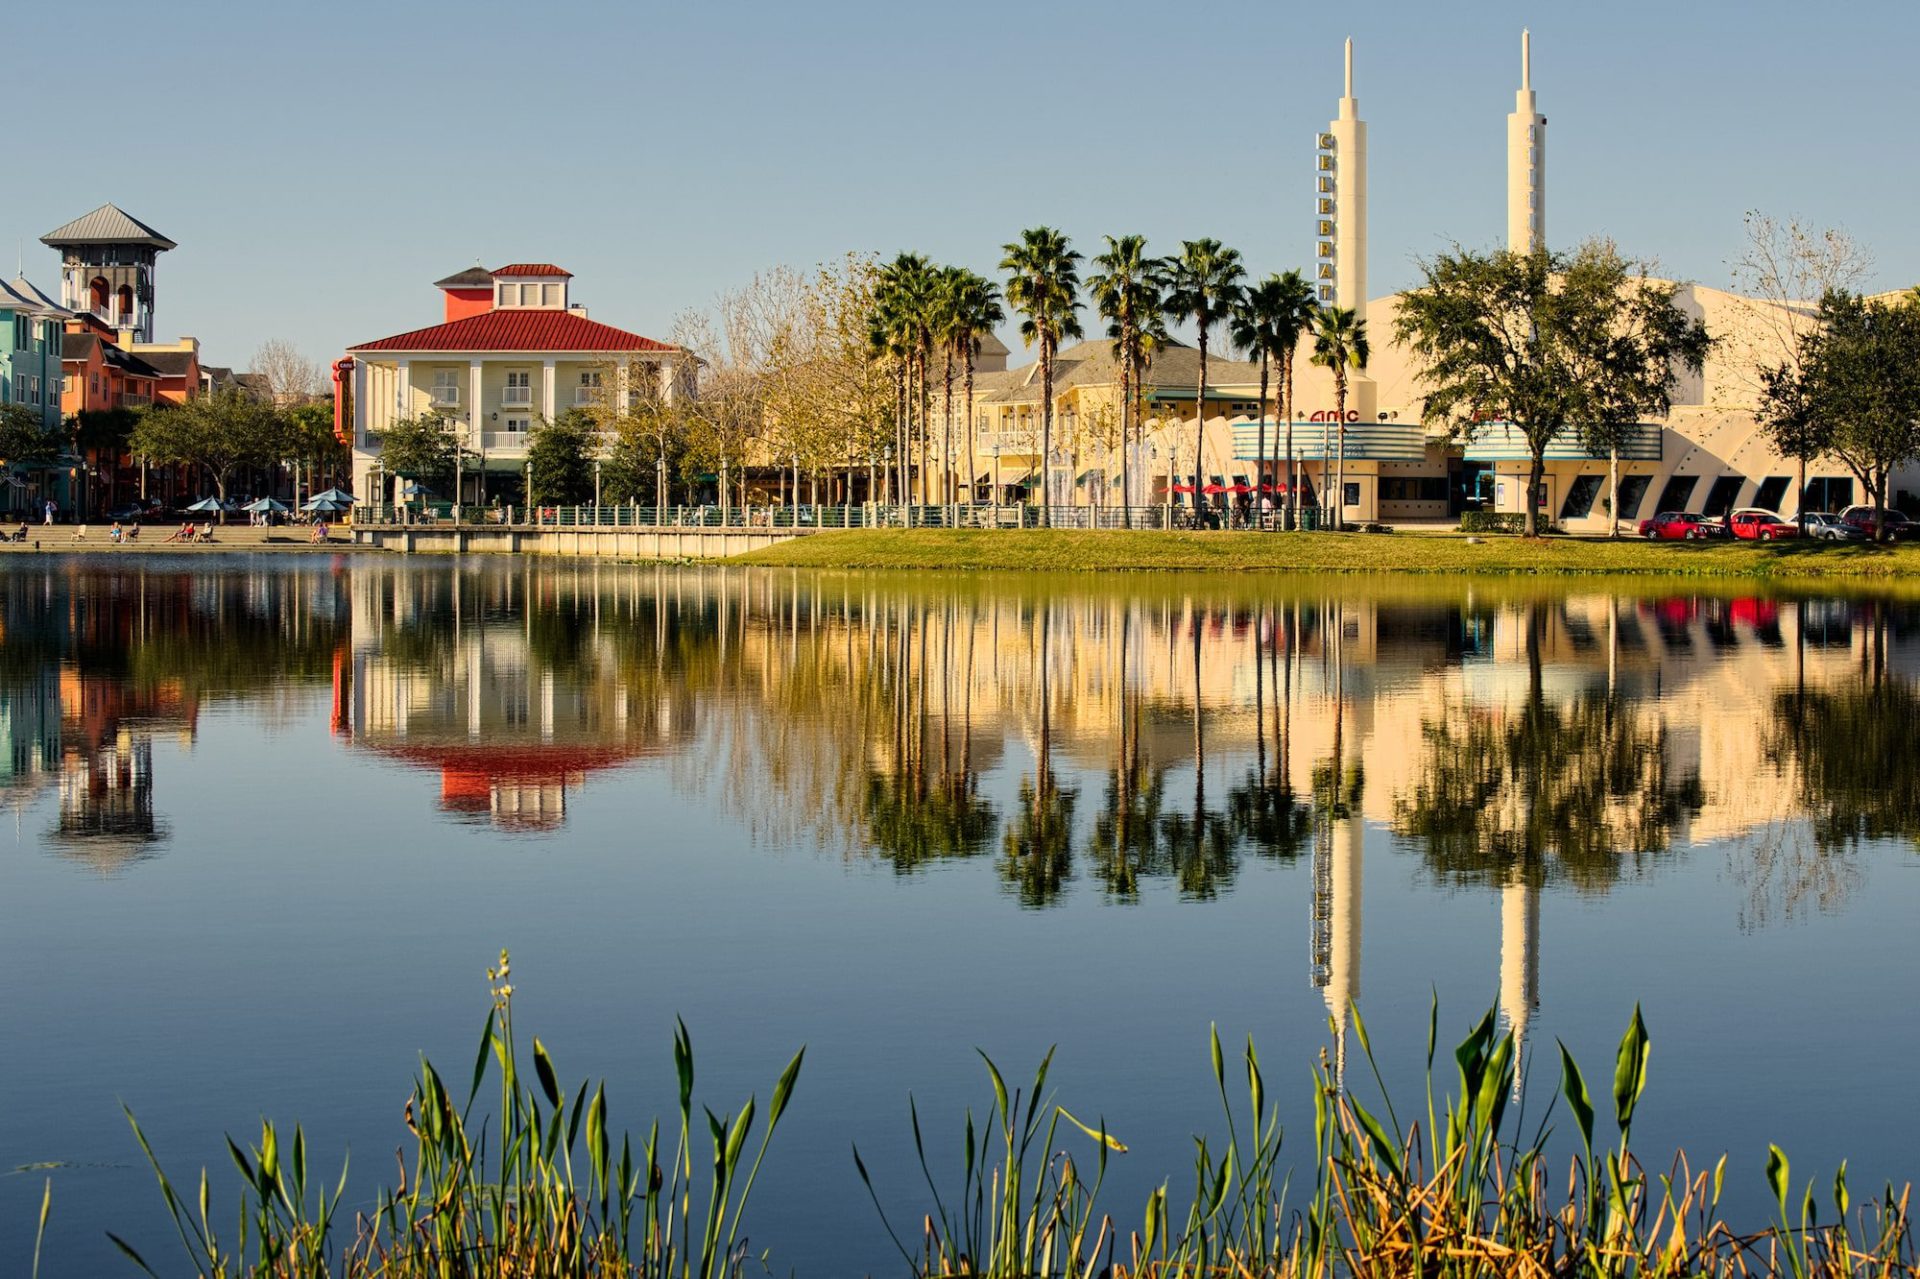 A town in front of a lake near where Park Avenue Property Management provides Orlando property management